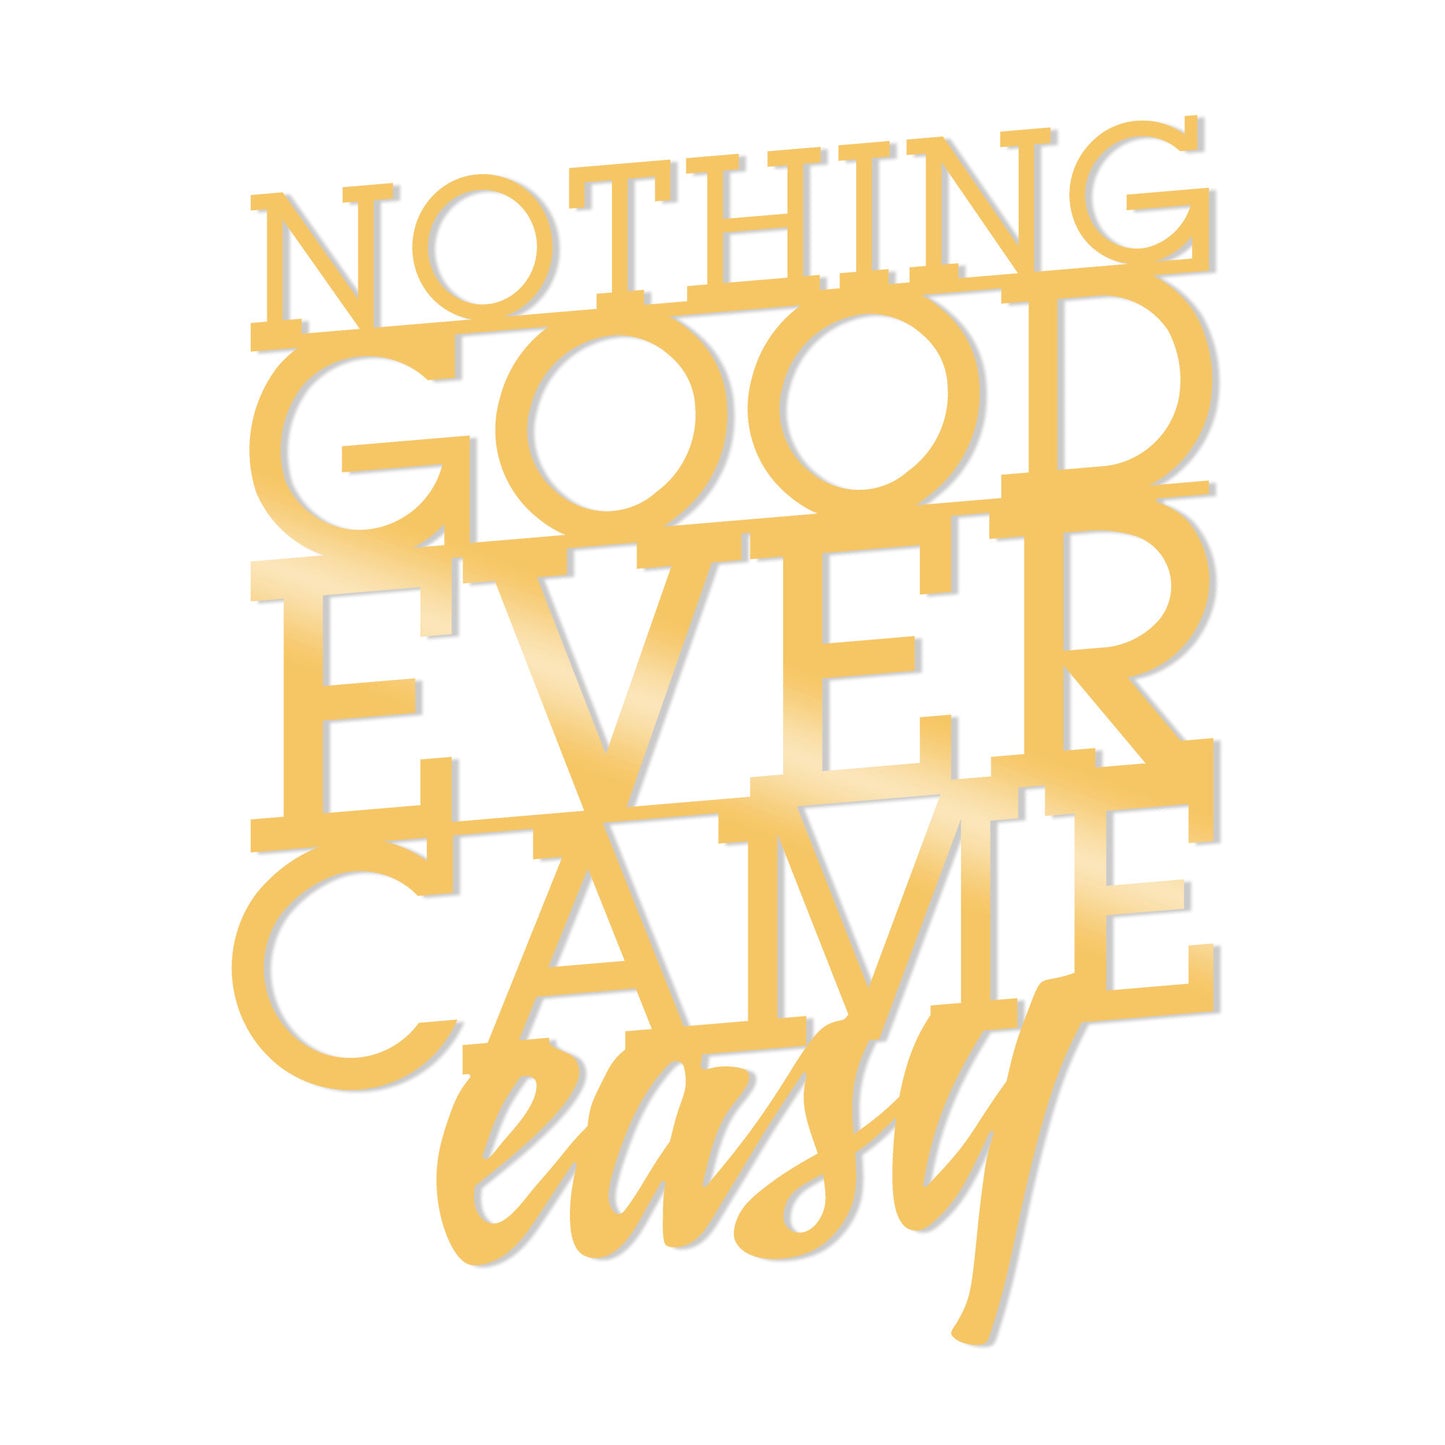 NOTHING GOOD EVER CAME EASY METAL DECOR - GOLD